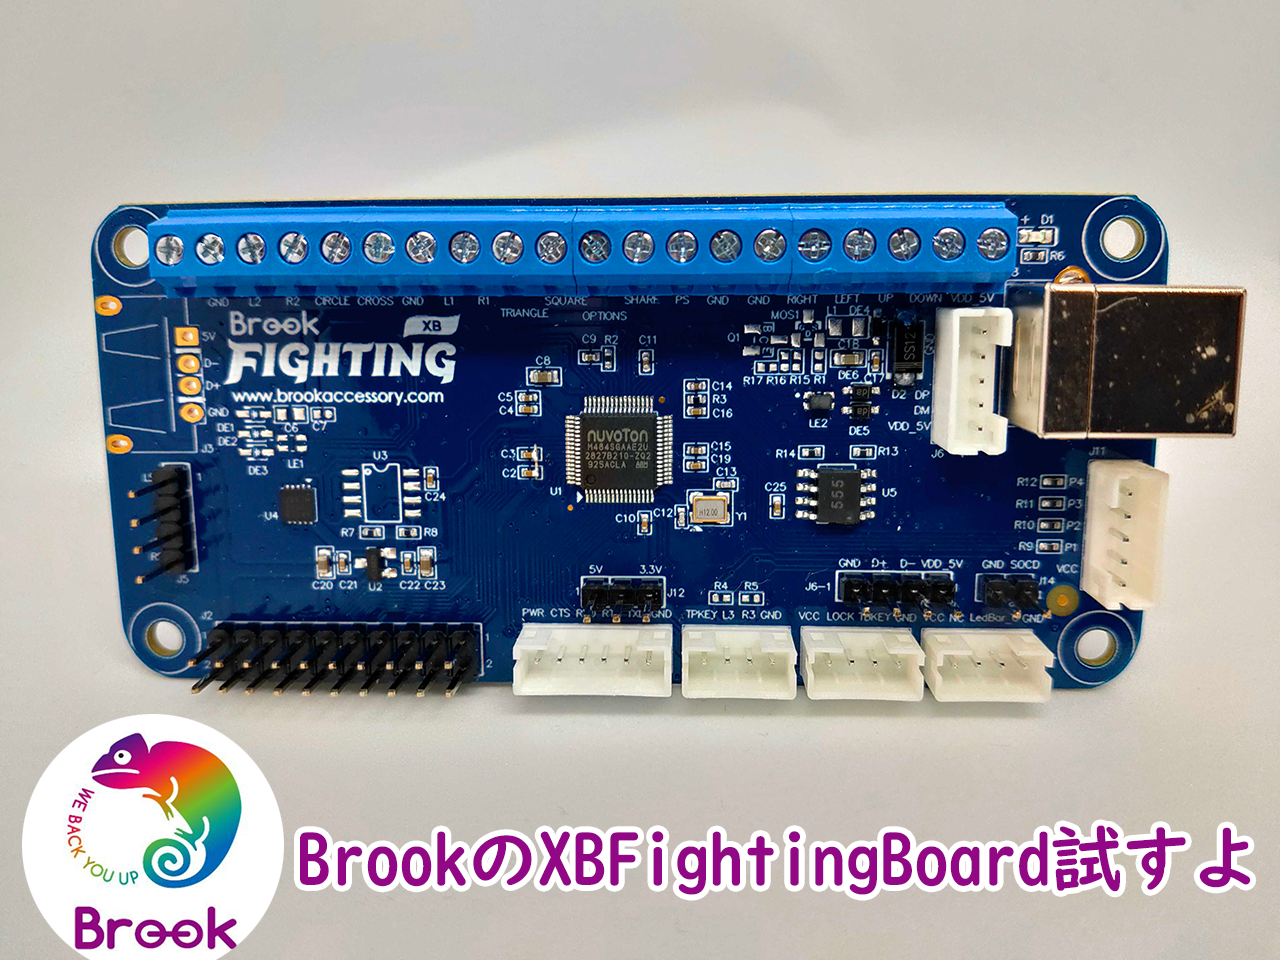 Brook XB FIGHTING BOARD EnglishReview